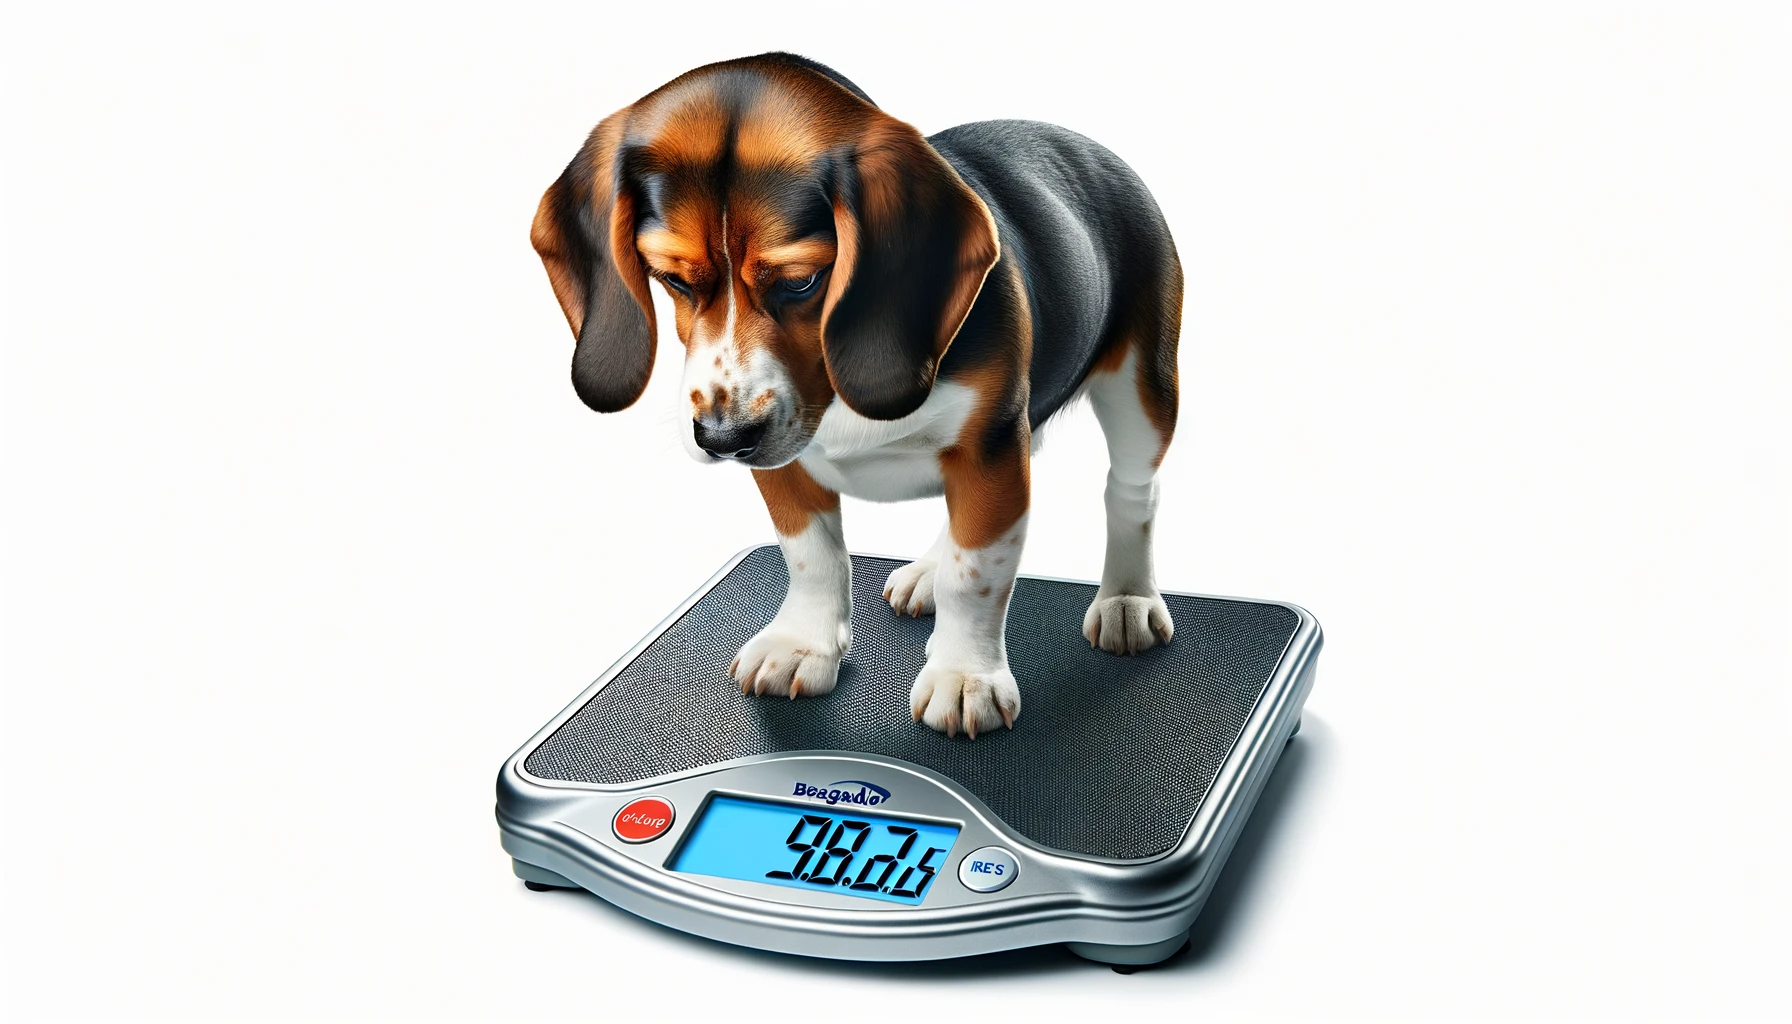 Beagador standing on a weighing scale